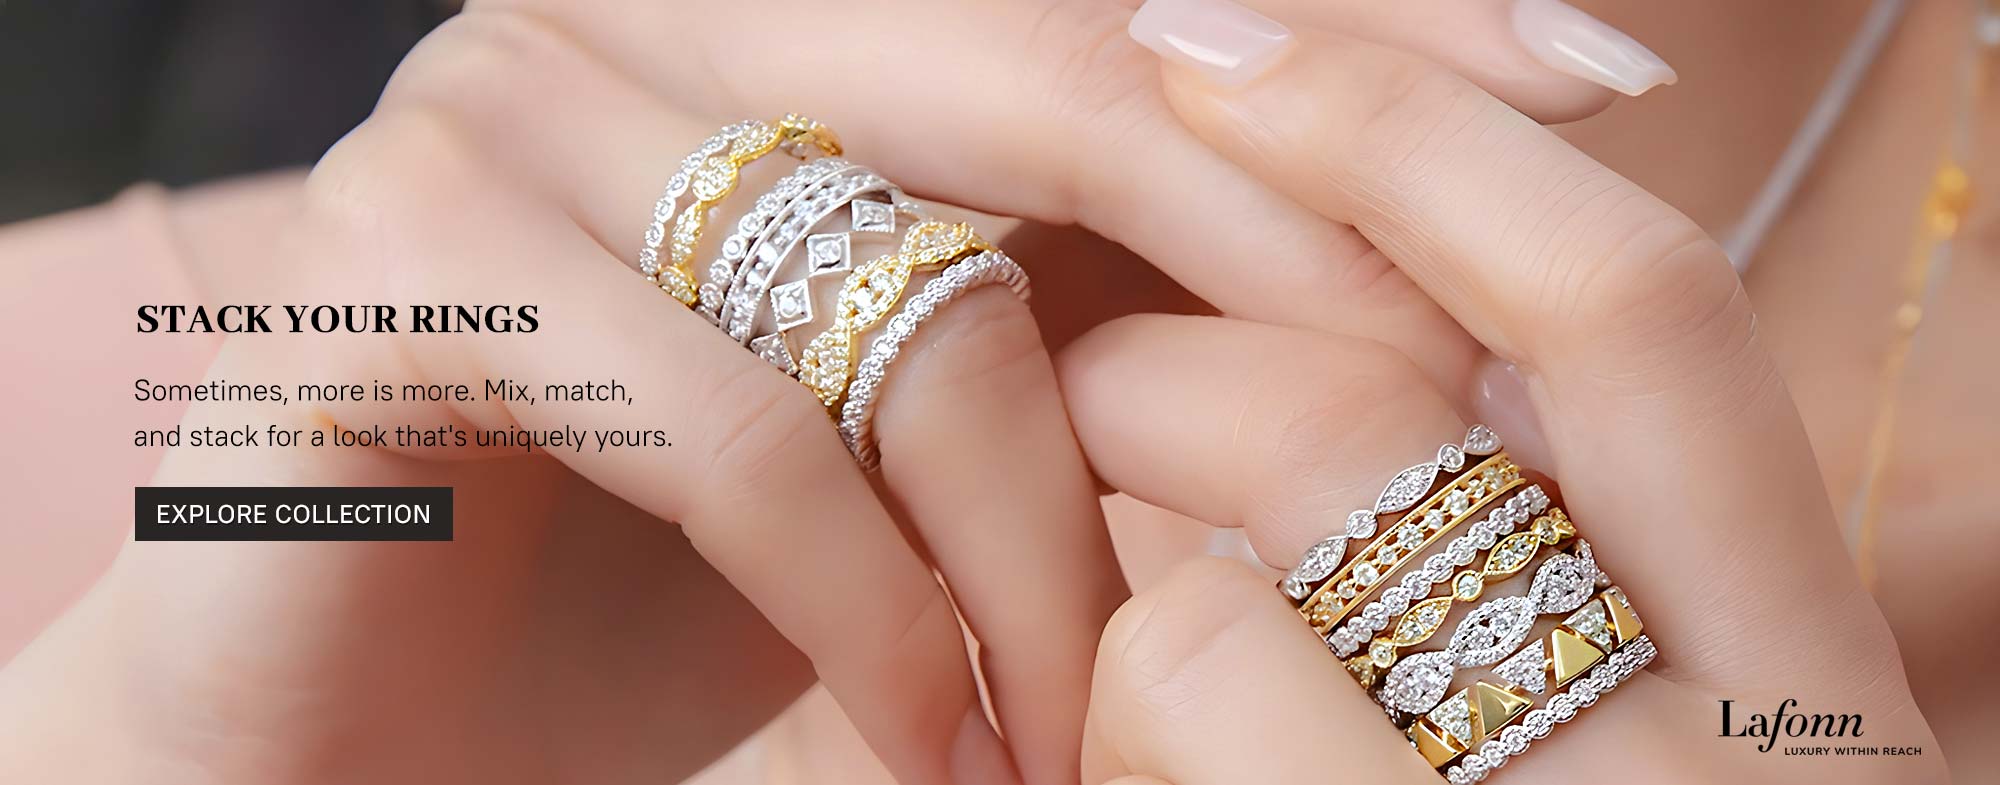 Lafonn Stackable Rings at Carters Diamond Jewelers